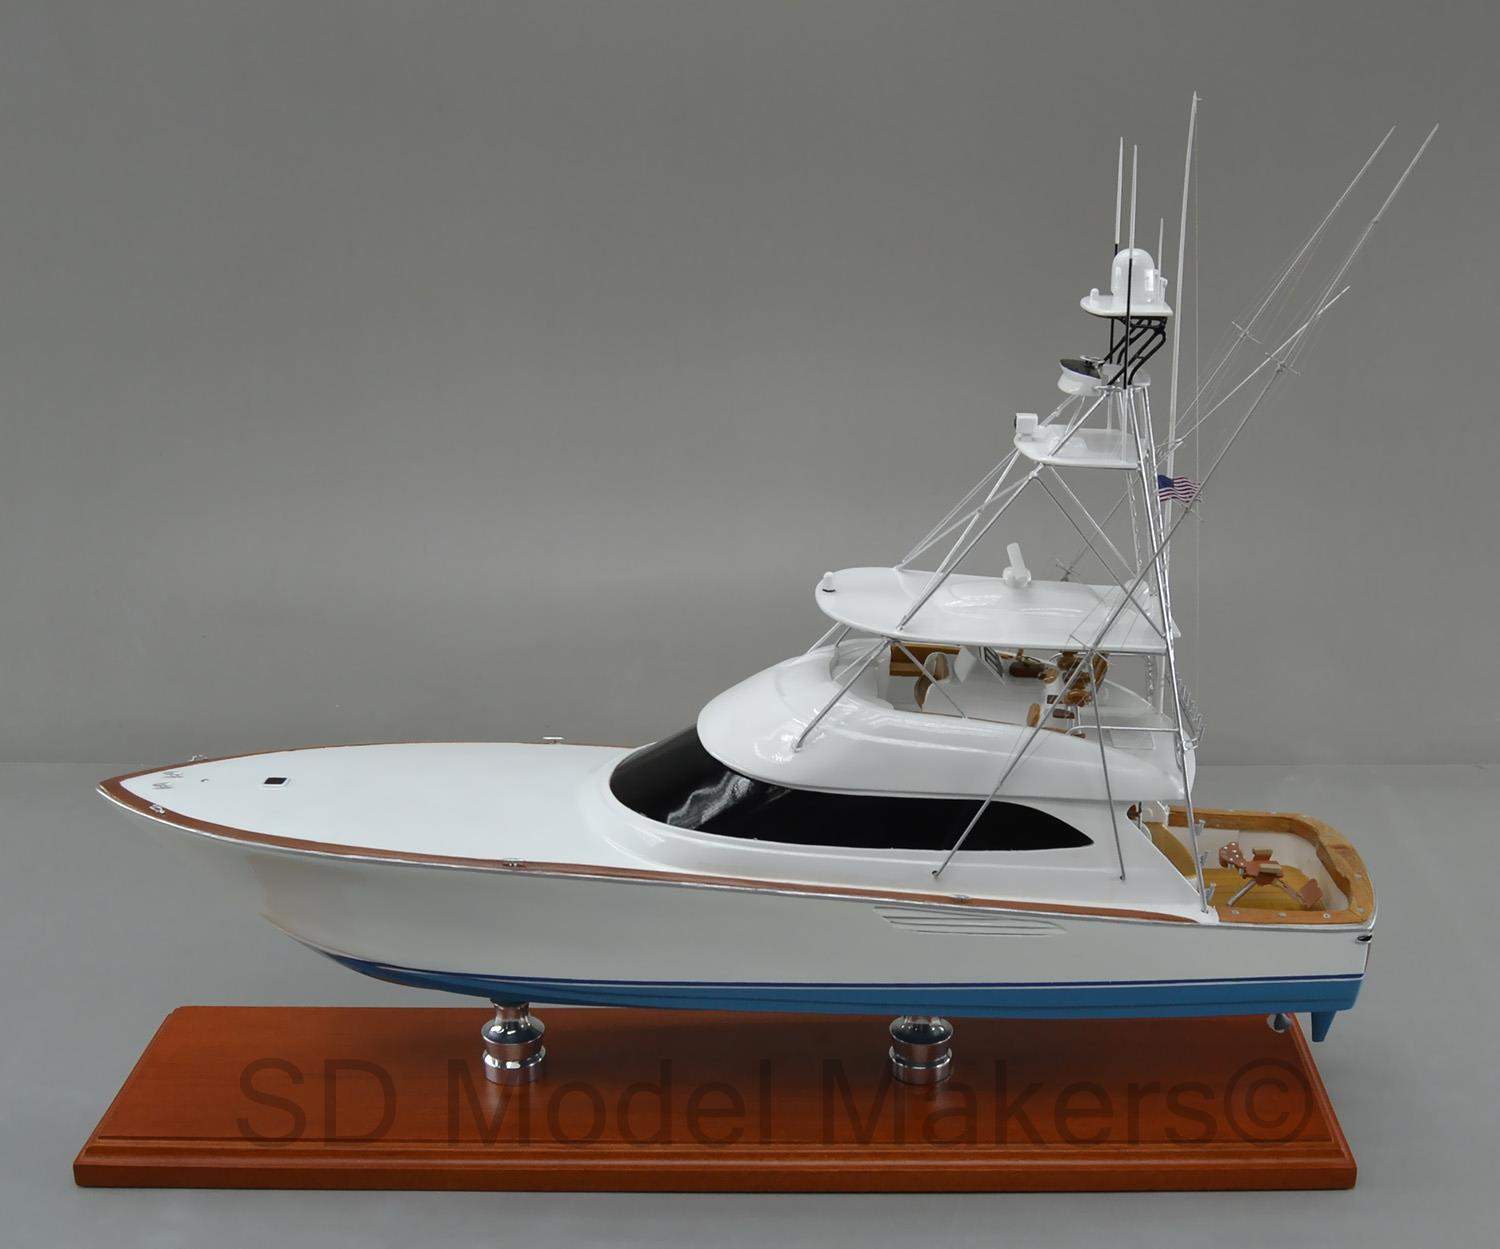 SD Model Makers: Fish On!!! 24” replica model of a Viking 70 Sport